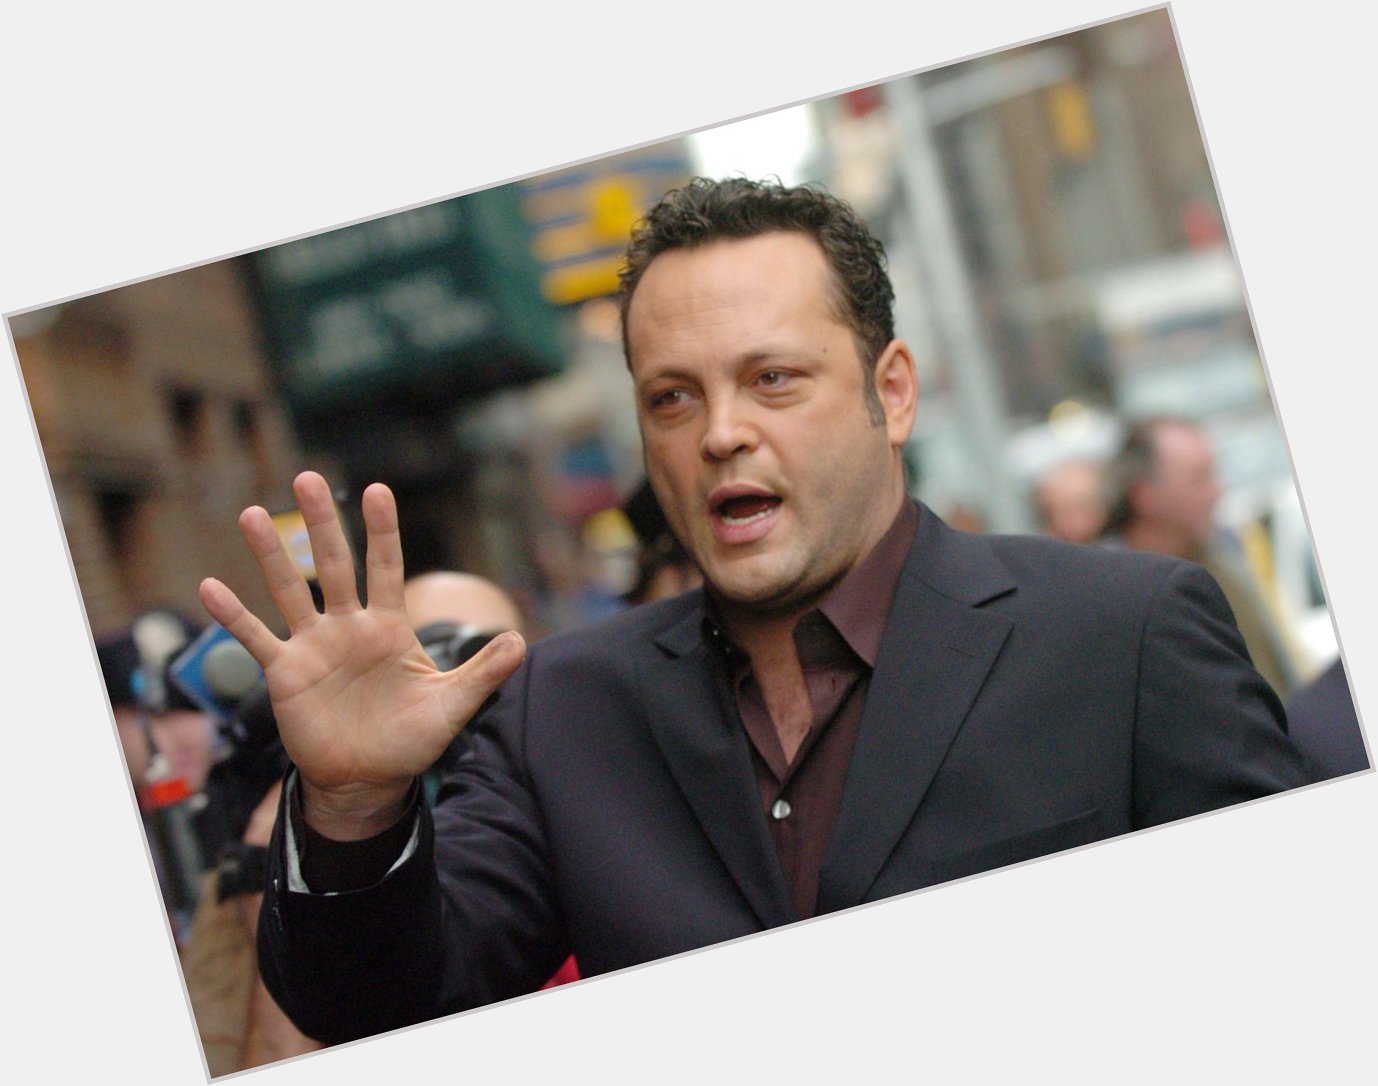 Happy Birthday to Vince Vaughn, who turns 45 today! 